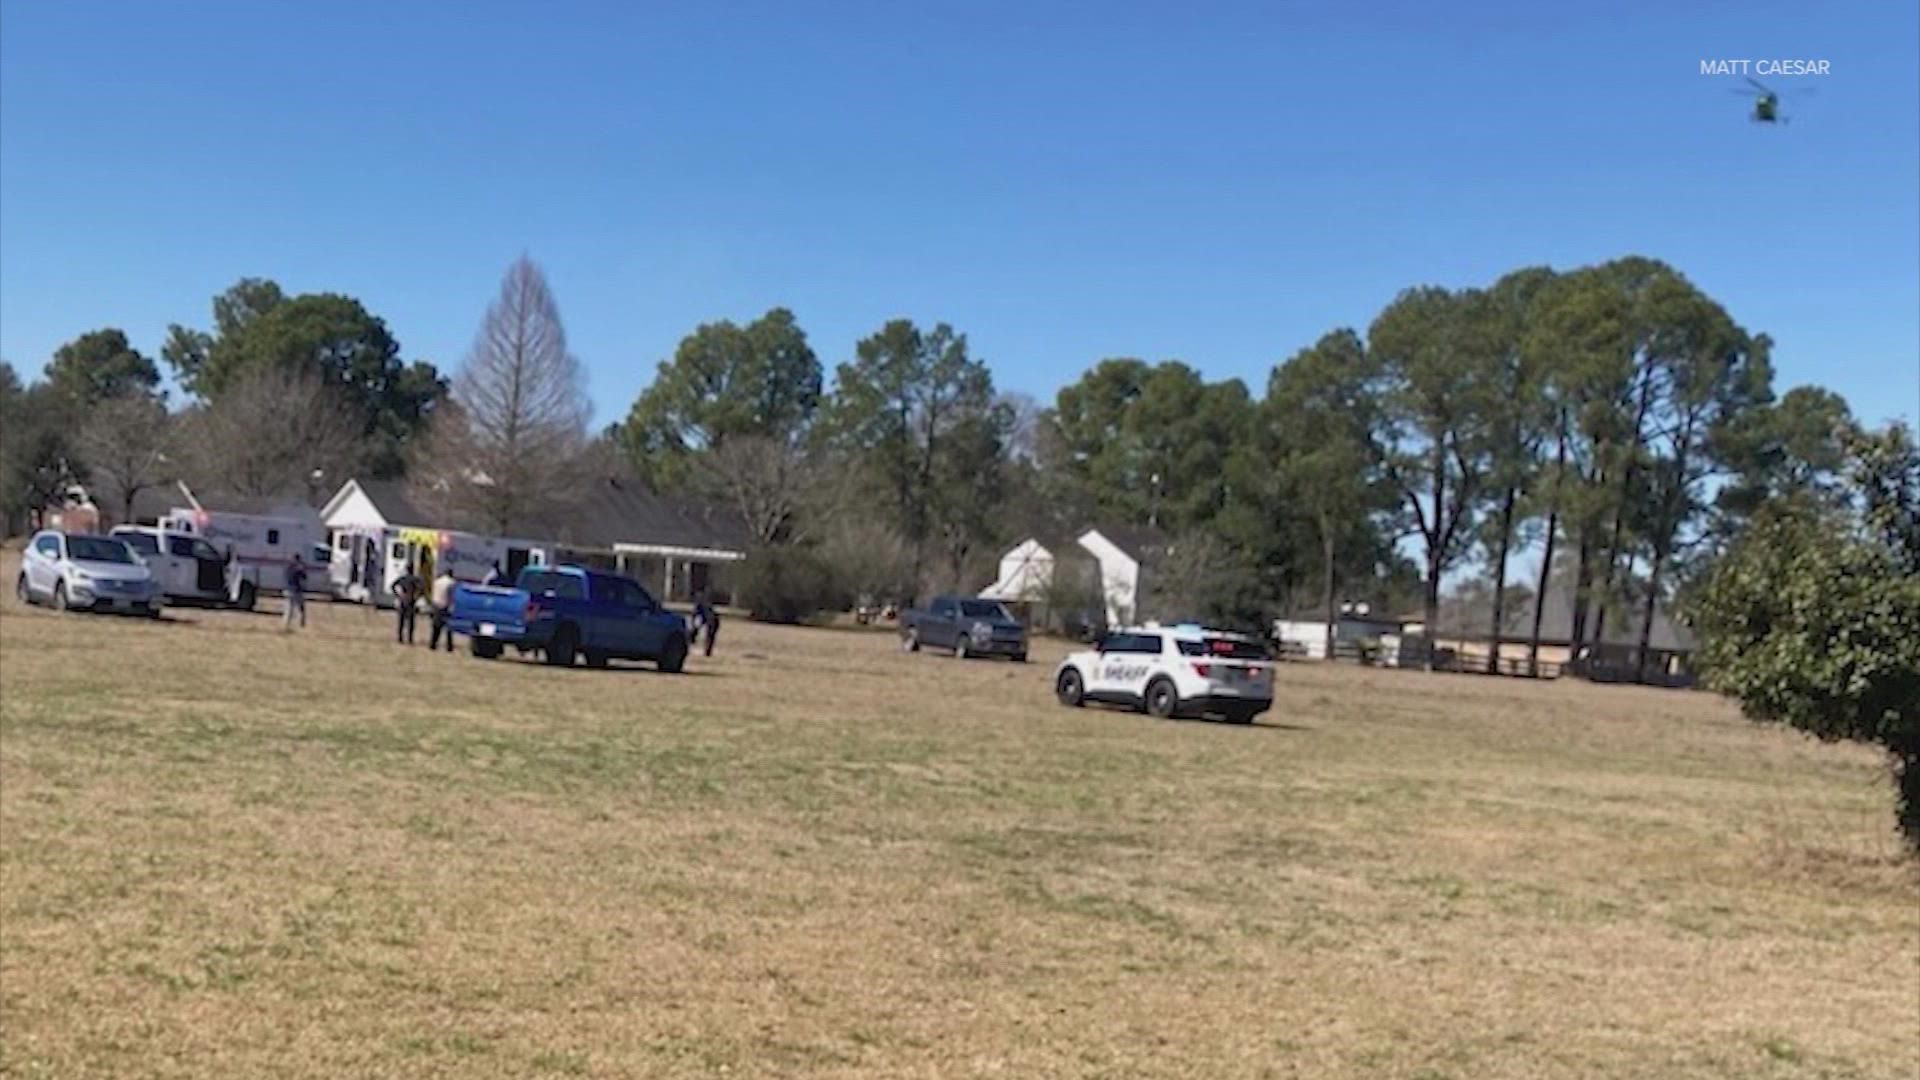 Skydive Houston said the instructor has died and the client remains hospitalized with serious, but non-life-threatening injuries.